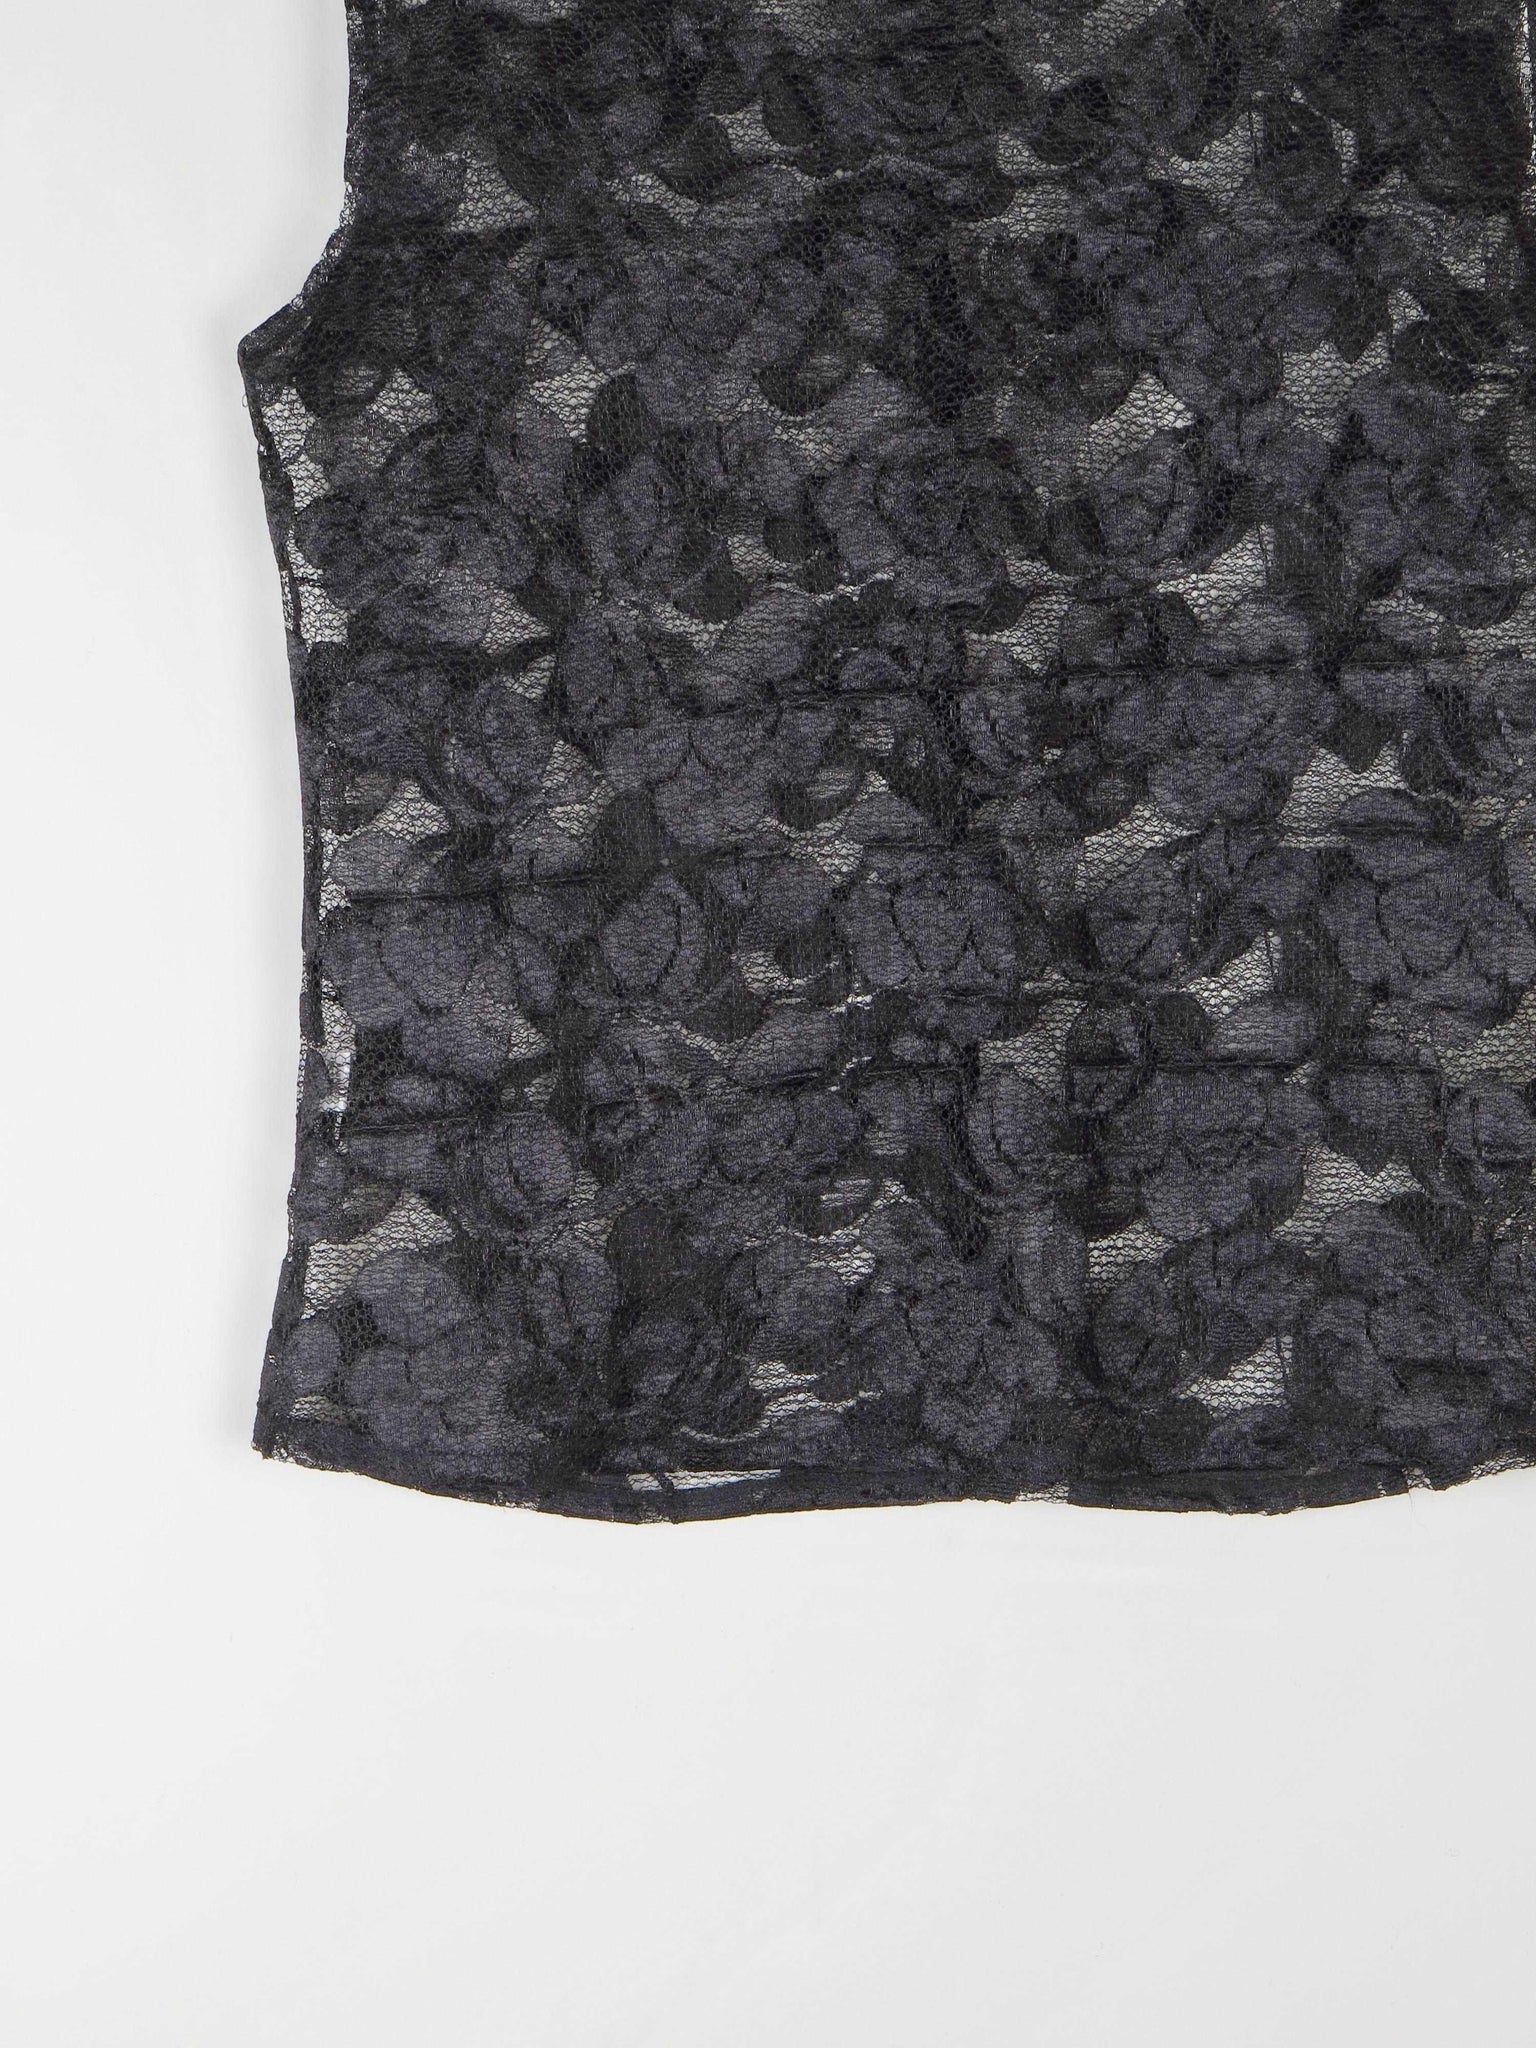 Women’s Vintage Black Lace Sleeveless Blouse With High Neck M - The Harlequin